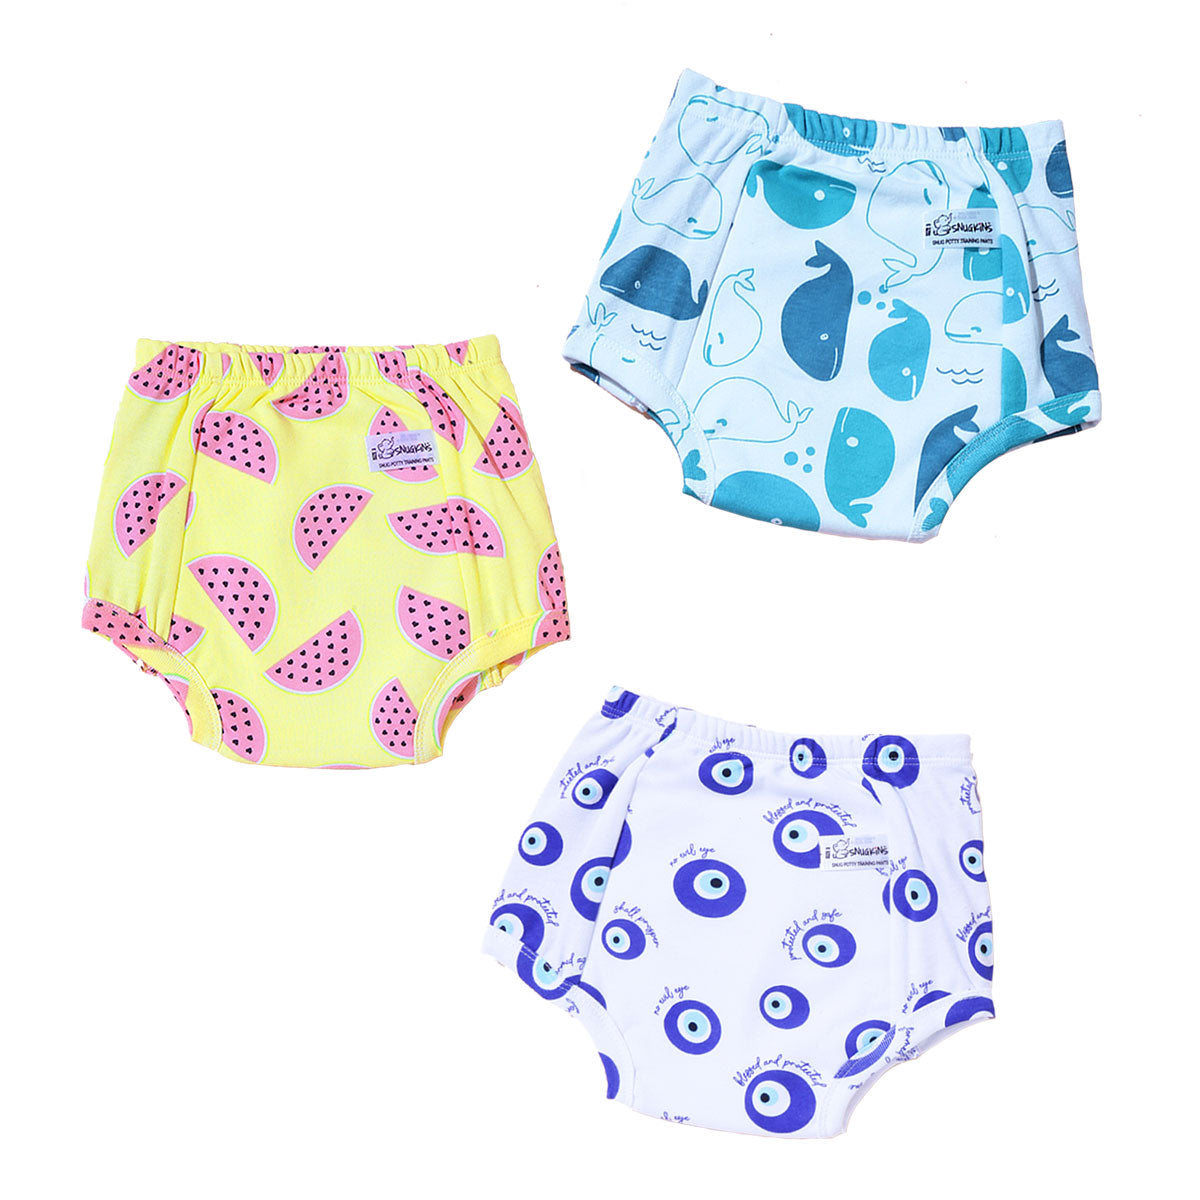 Potty Training Pants - Playtime Trio Pack of 3